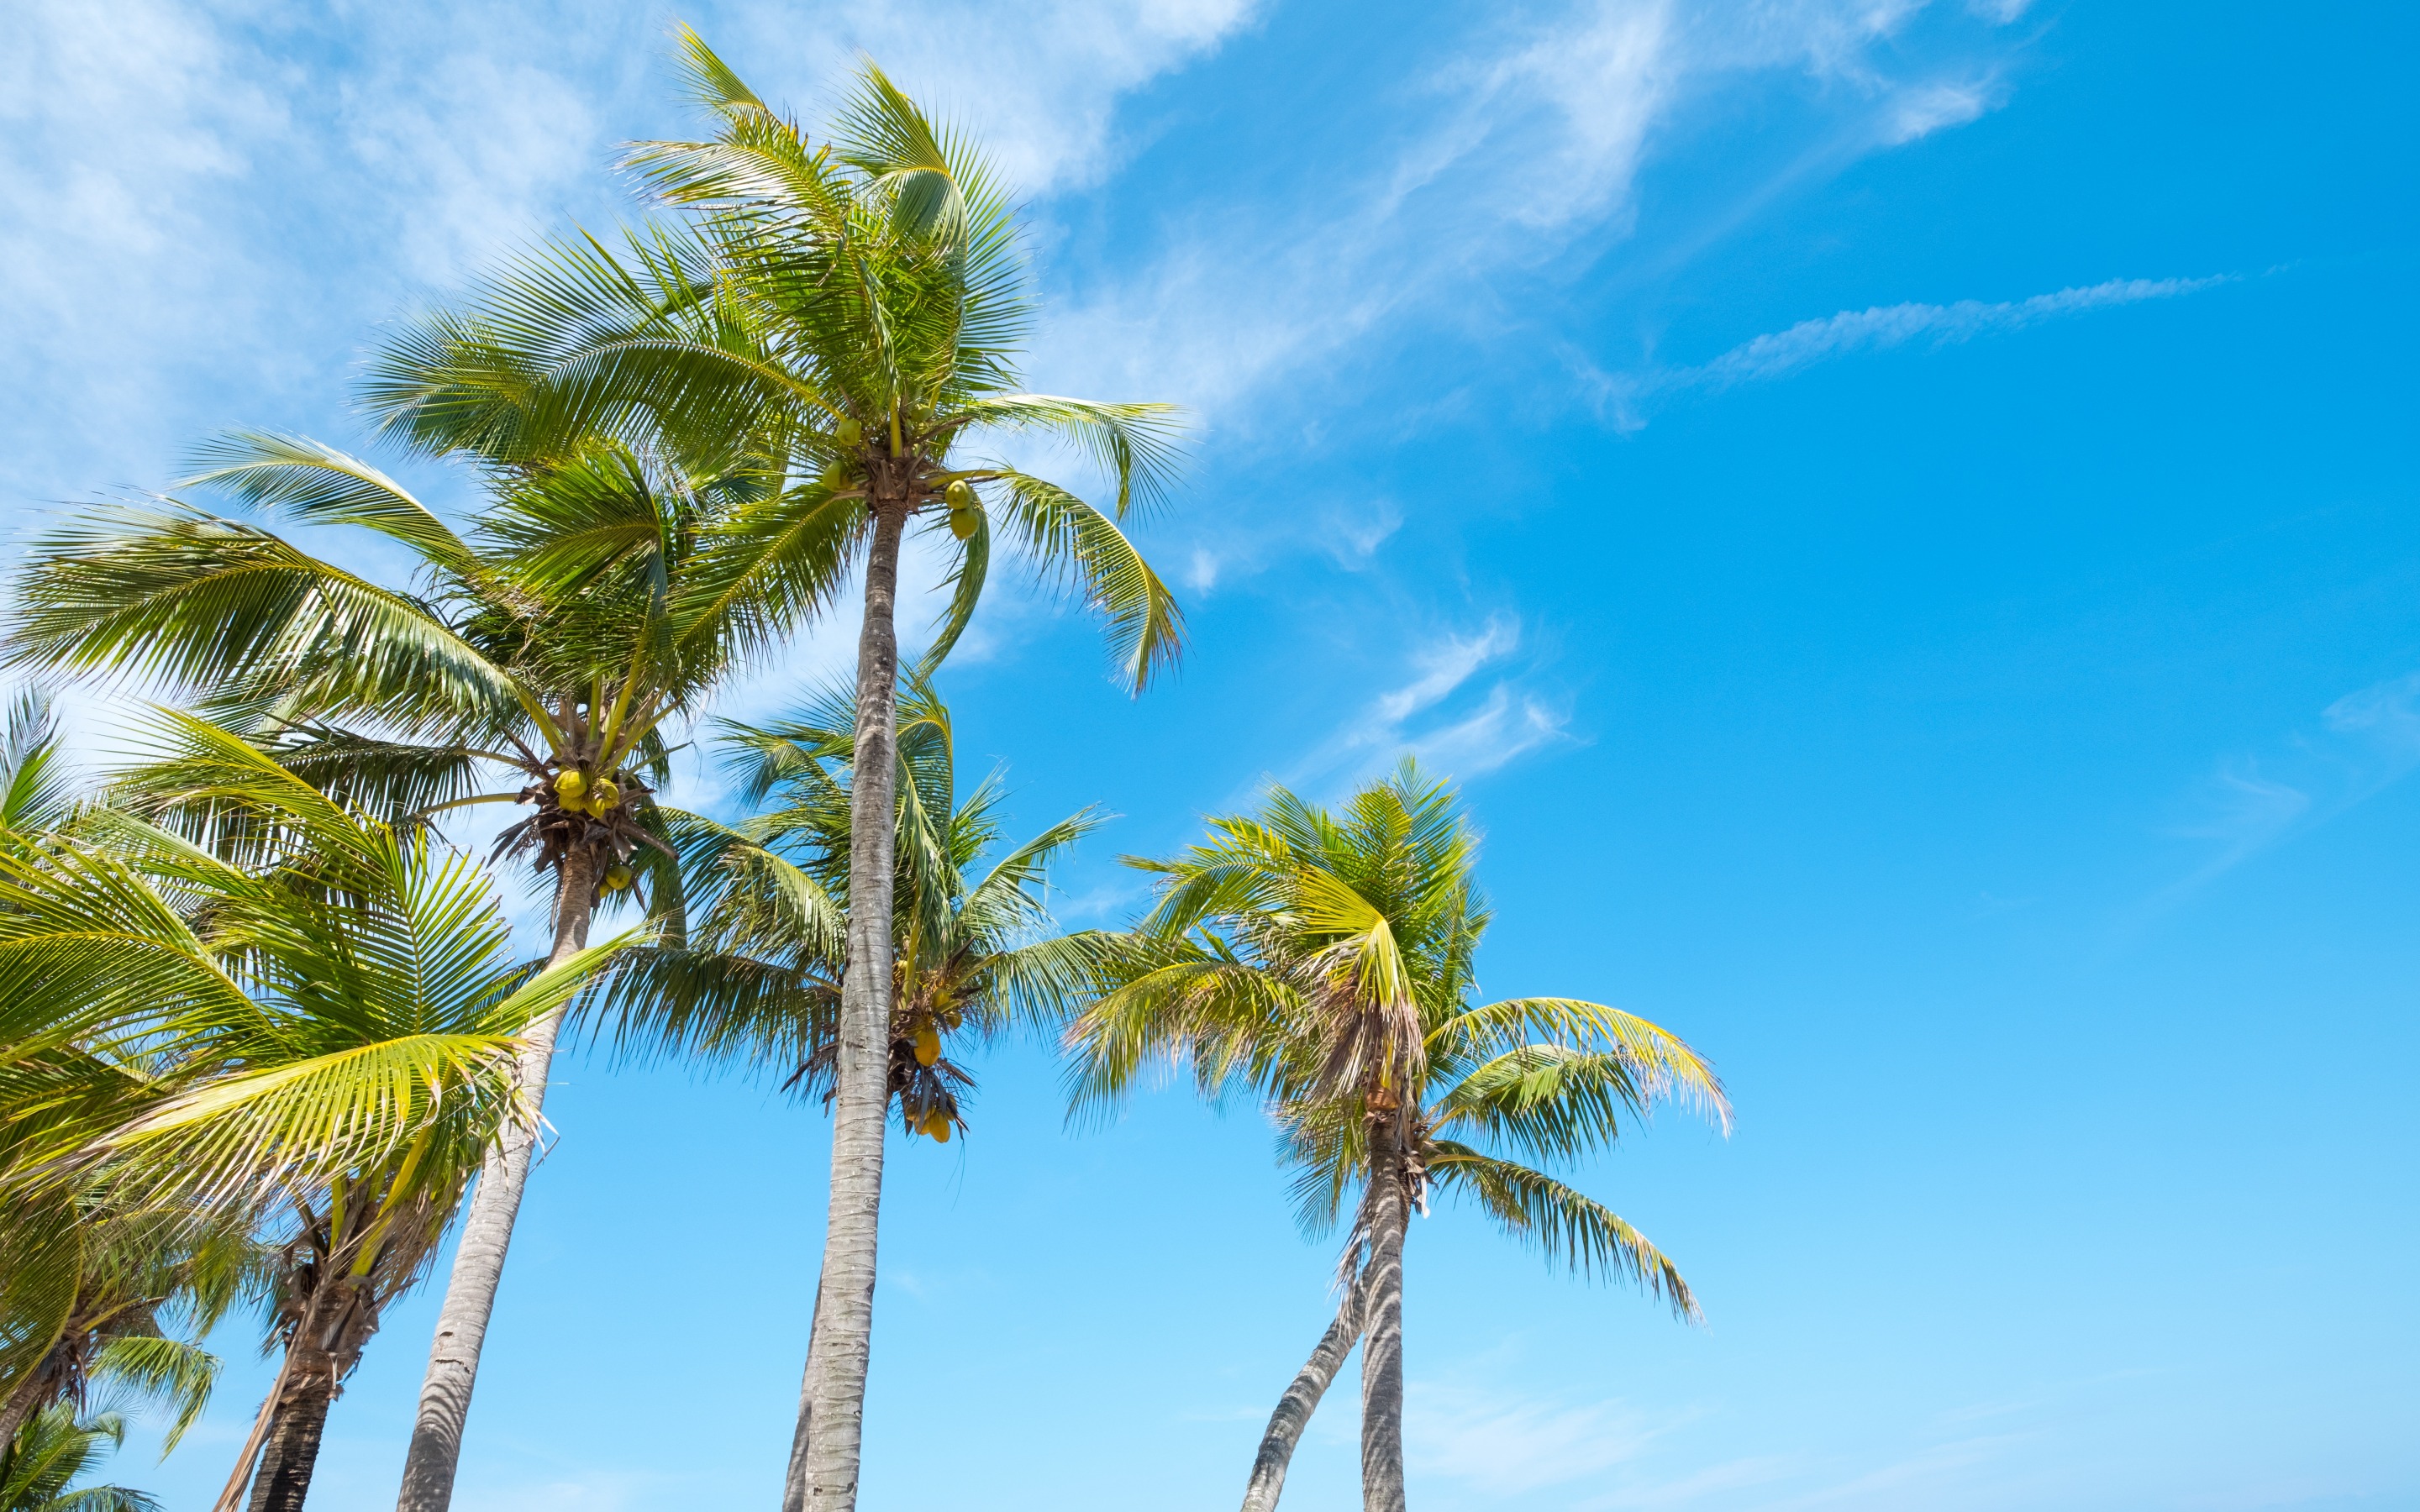 Download wallpaper tropical island, palms, coconuts on palm